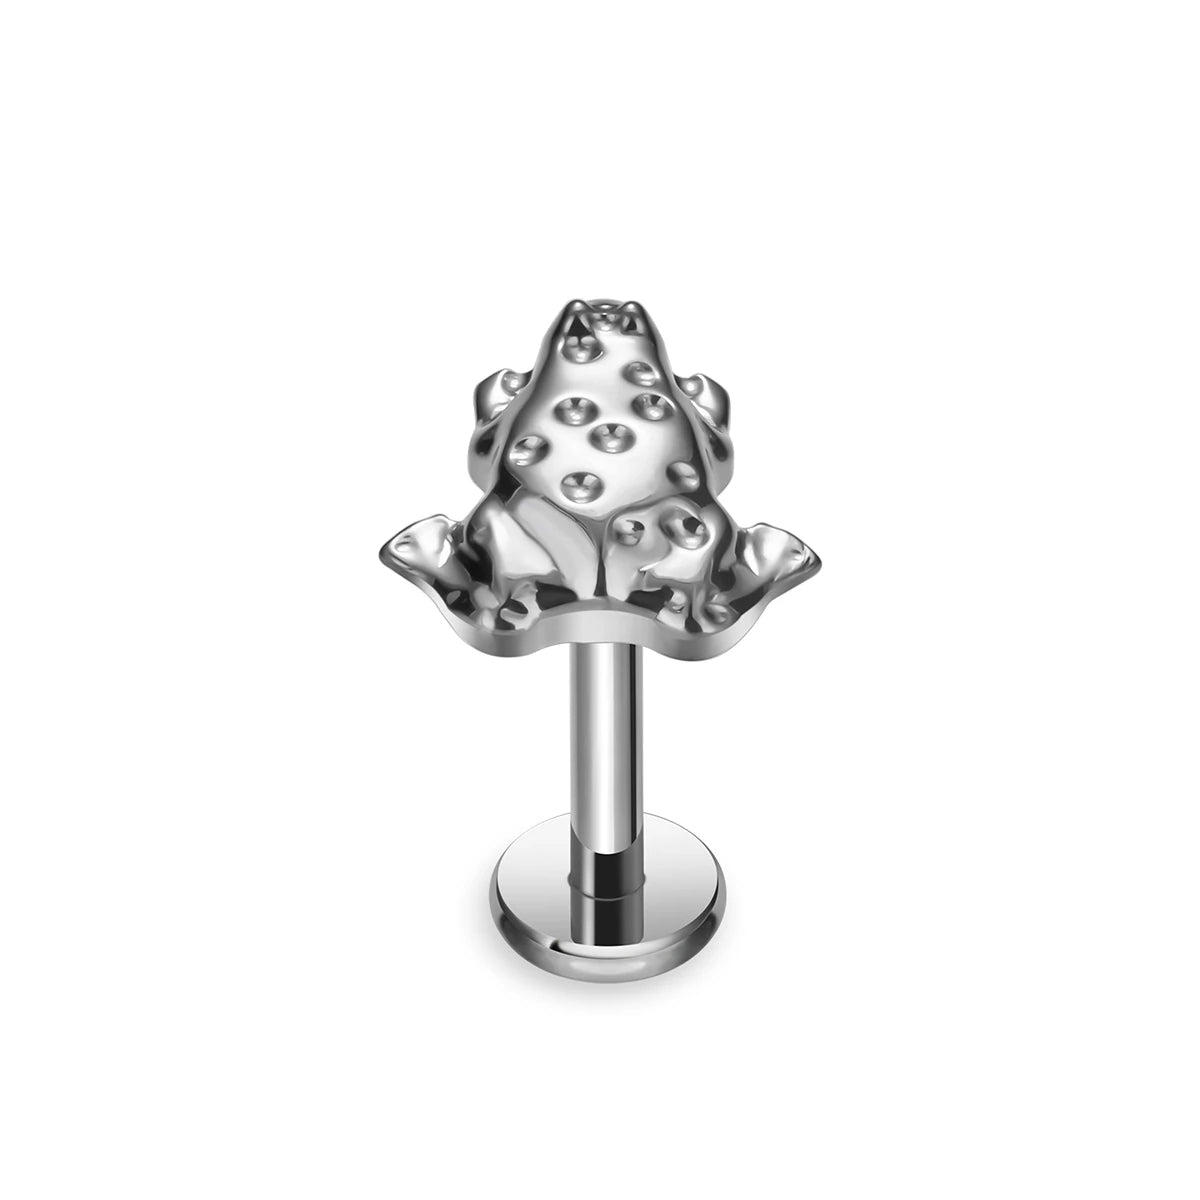 Frog nose stud frog stud earring titanium 16G cute nose studs – Ashley  Piercing Jewelry